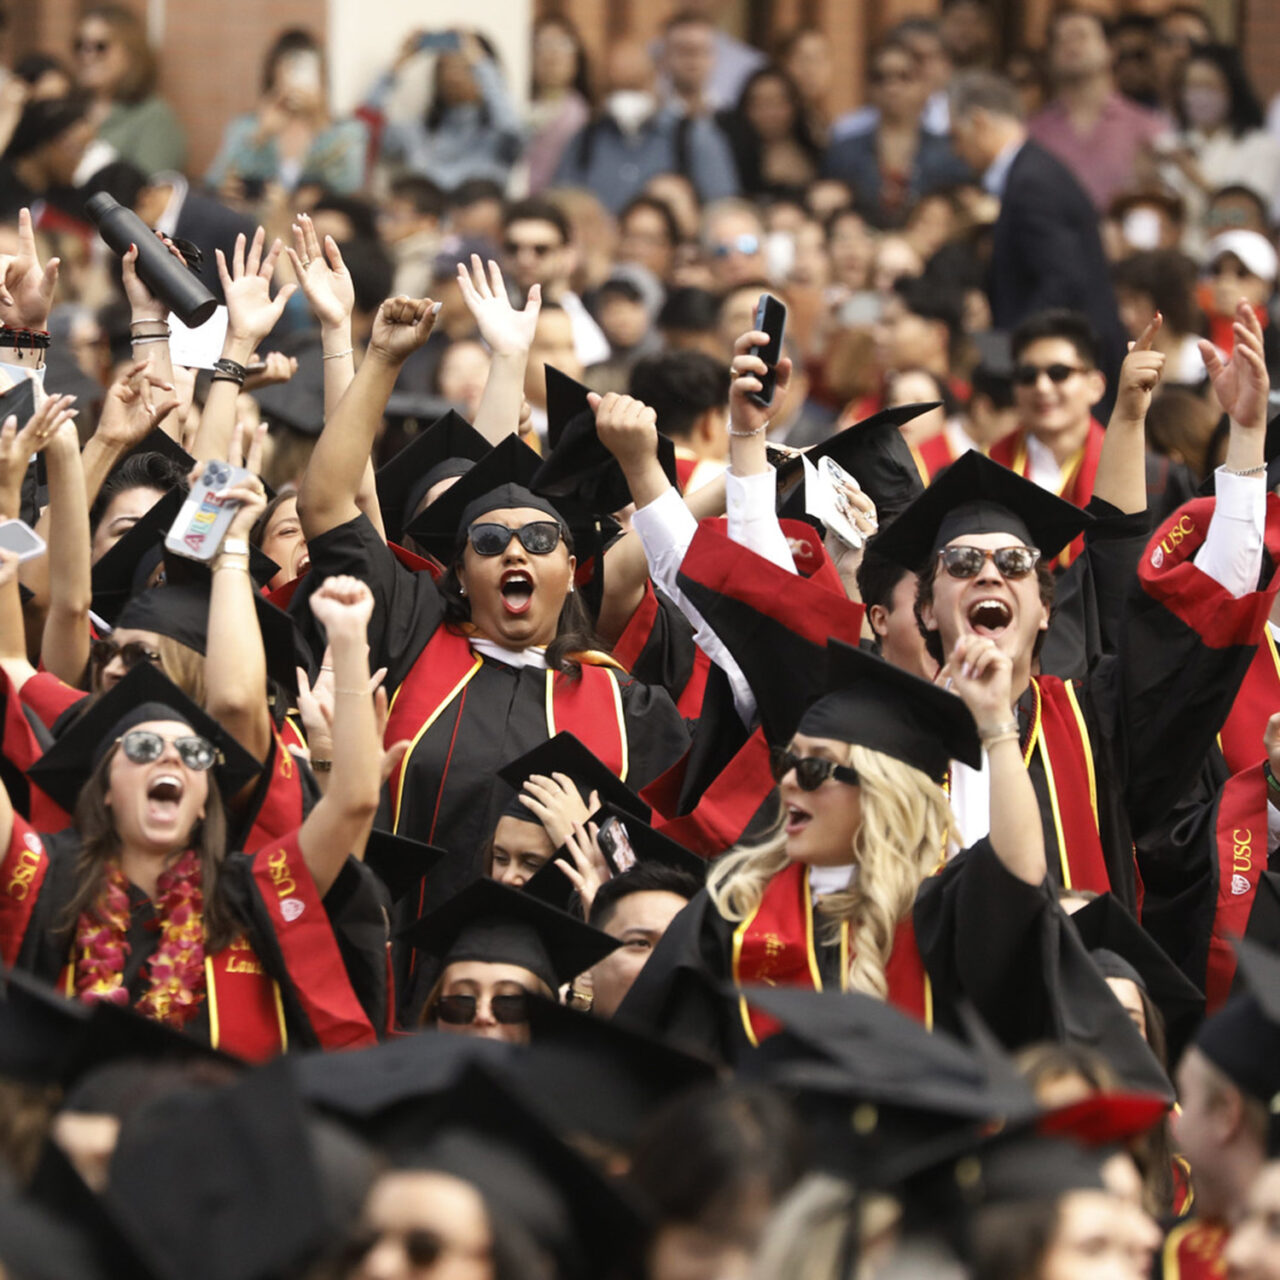 Students cheering at commencement ceremony